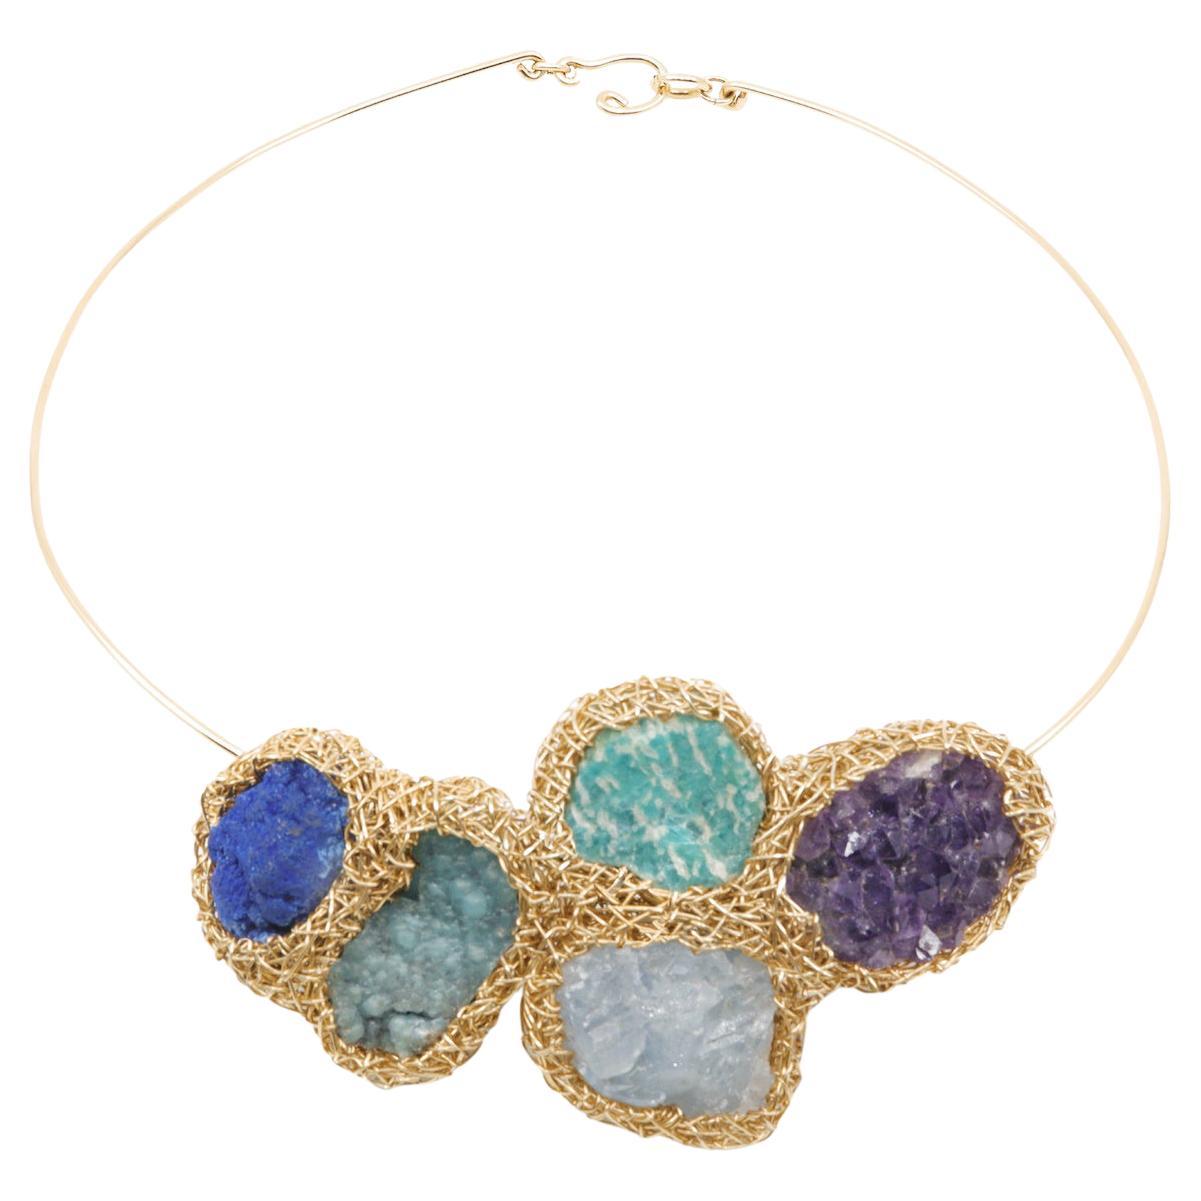 One-Off Raw Stone Cluster Necklace in 14kt Yellow Gold F. by the Artist Herself For Sale